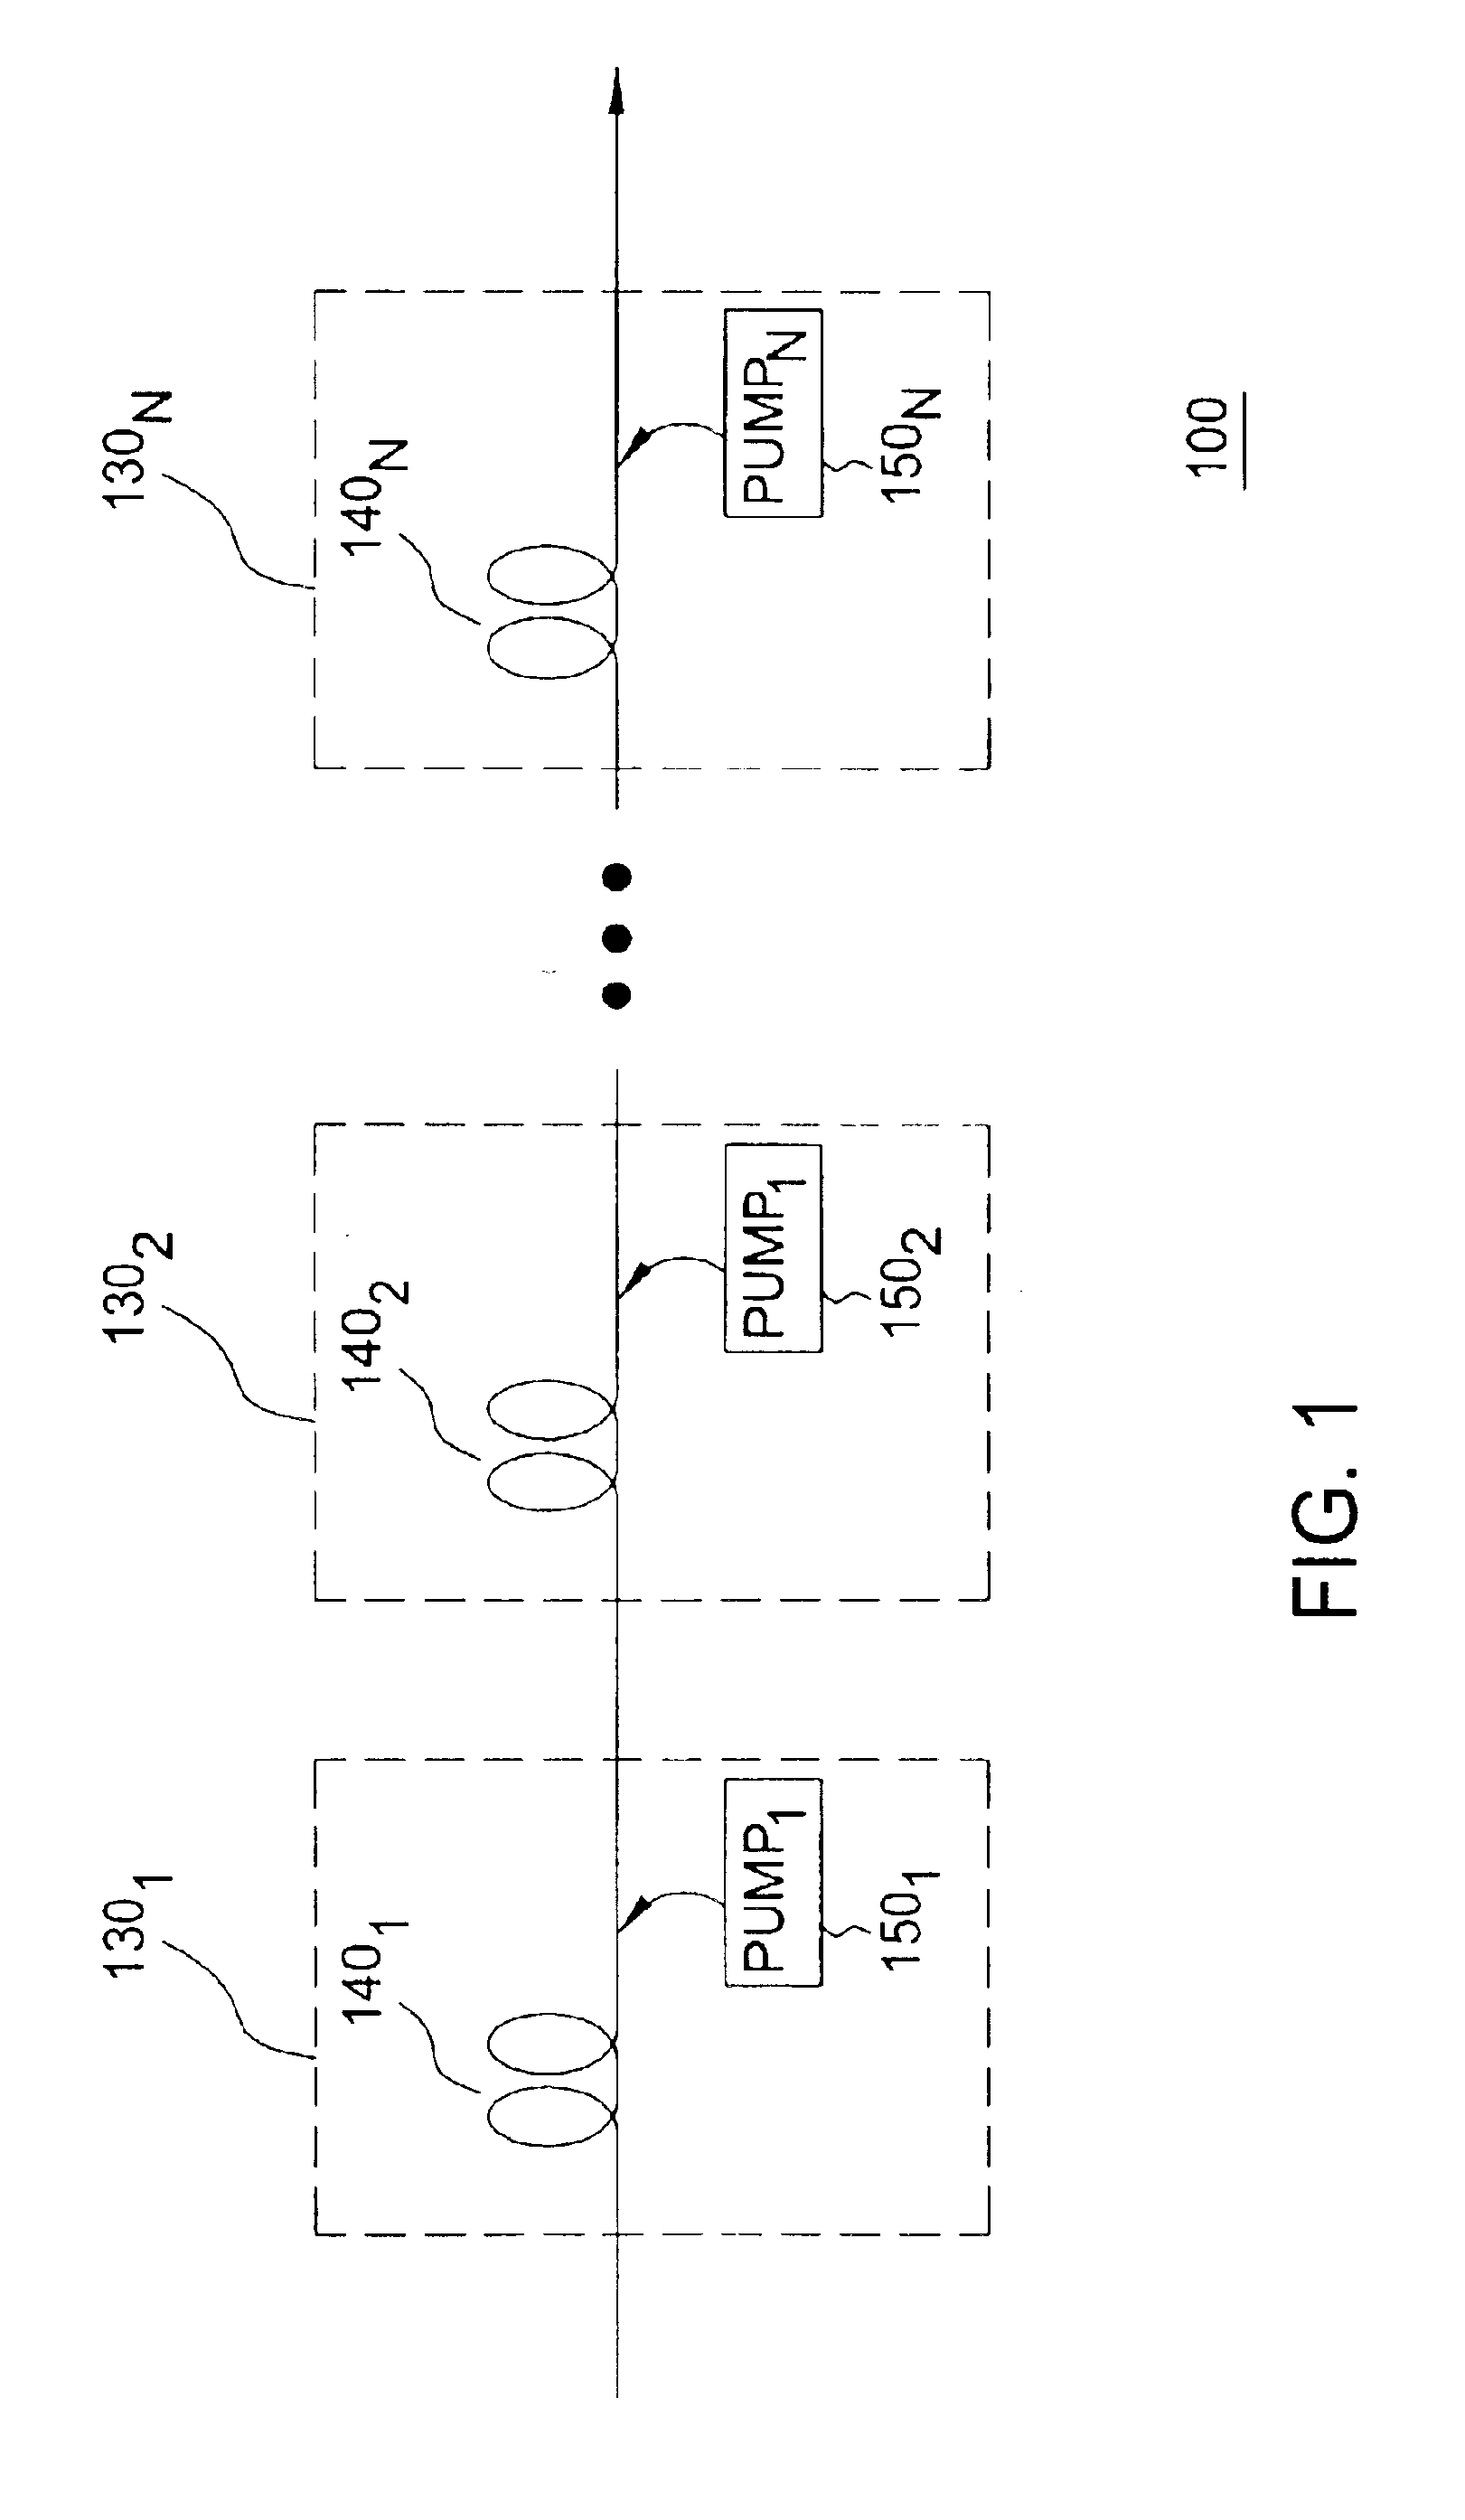 Method, apparatus and system for reducing gain ripple in a raman-amplified WDM system